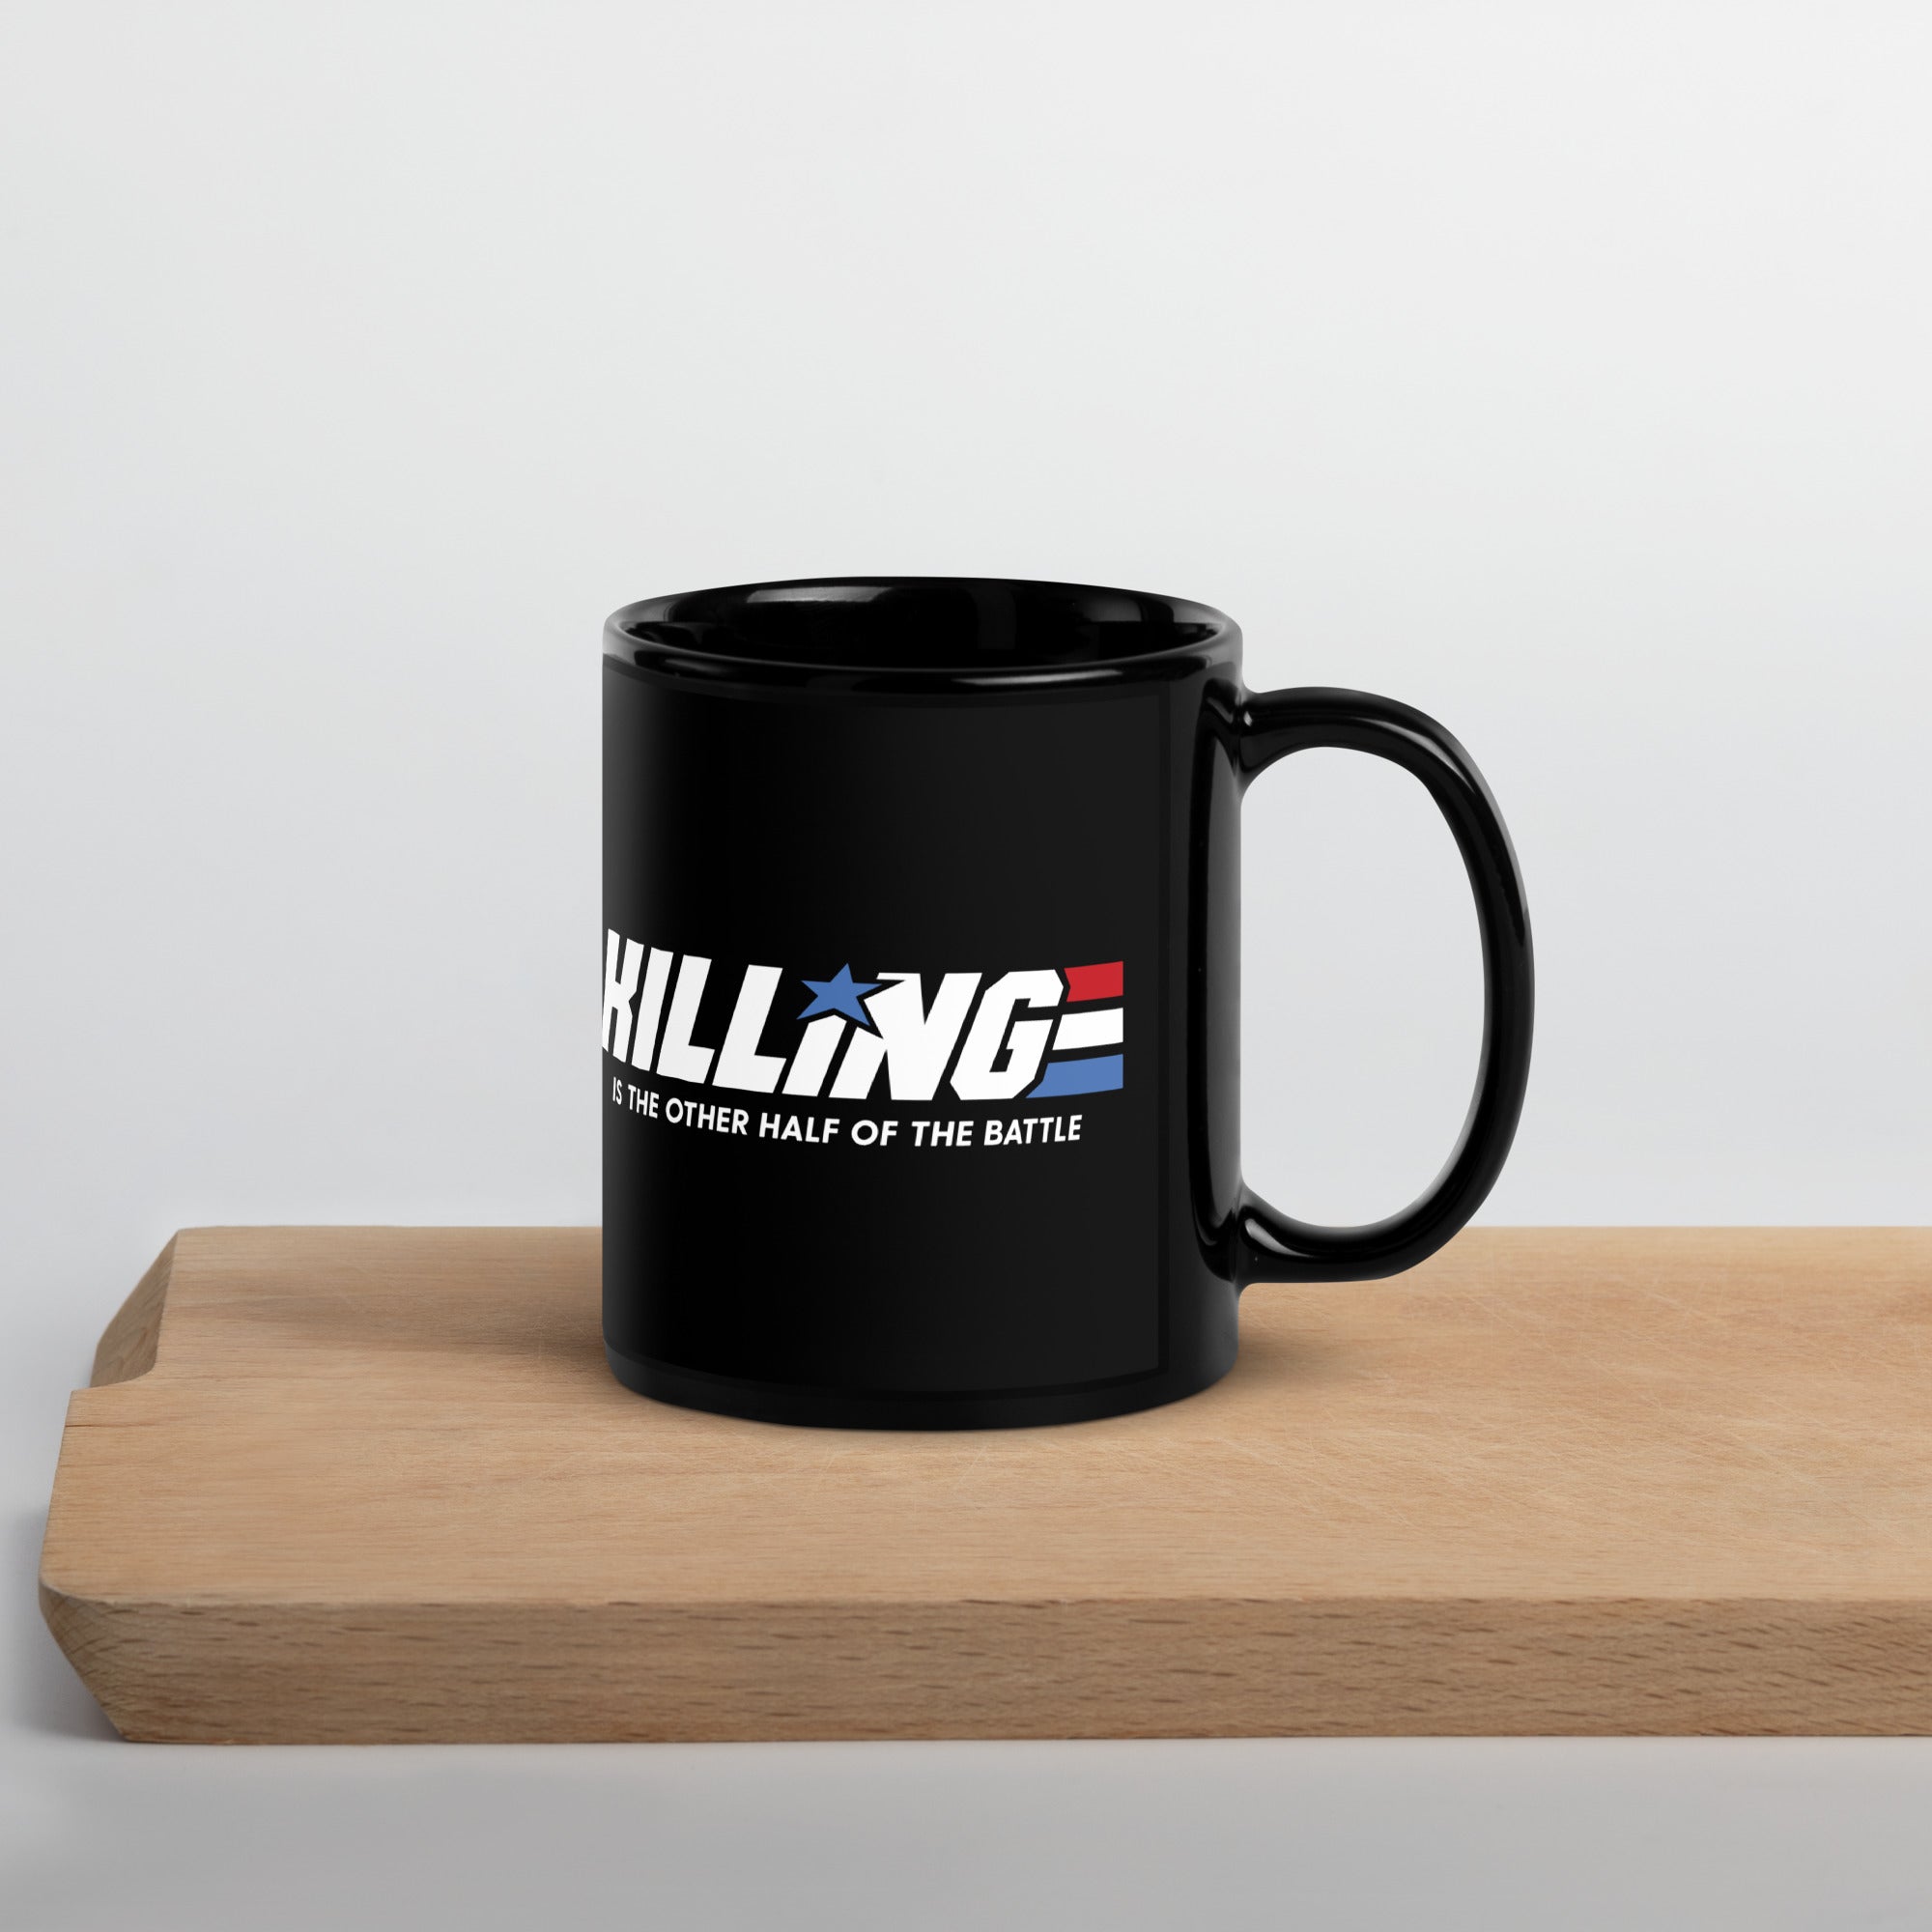 Killing is the Other Half of the Battle Mug